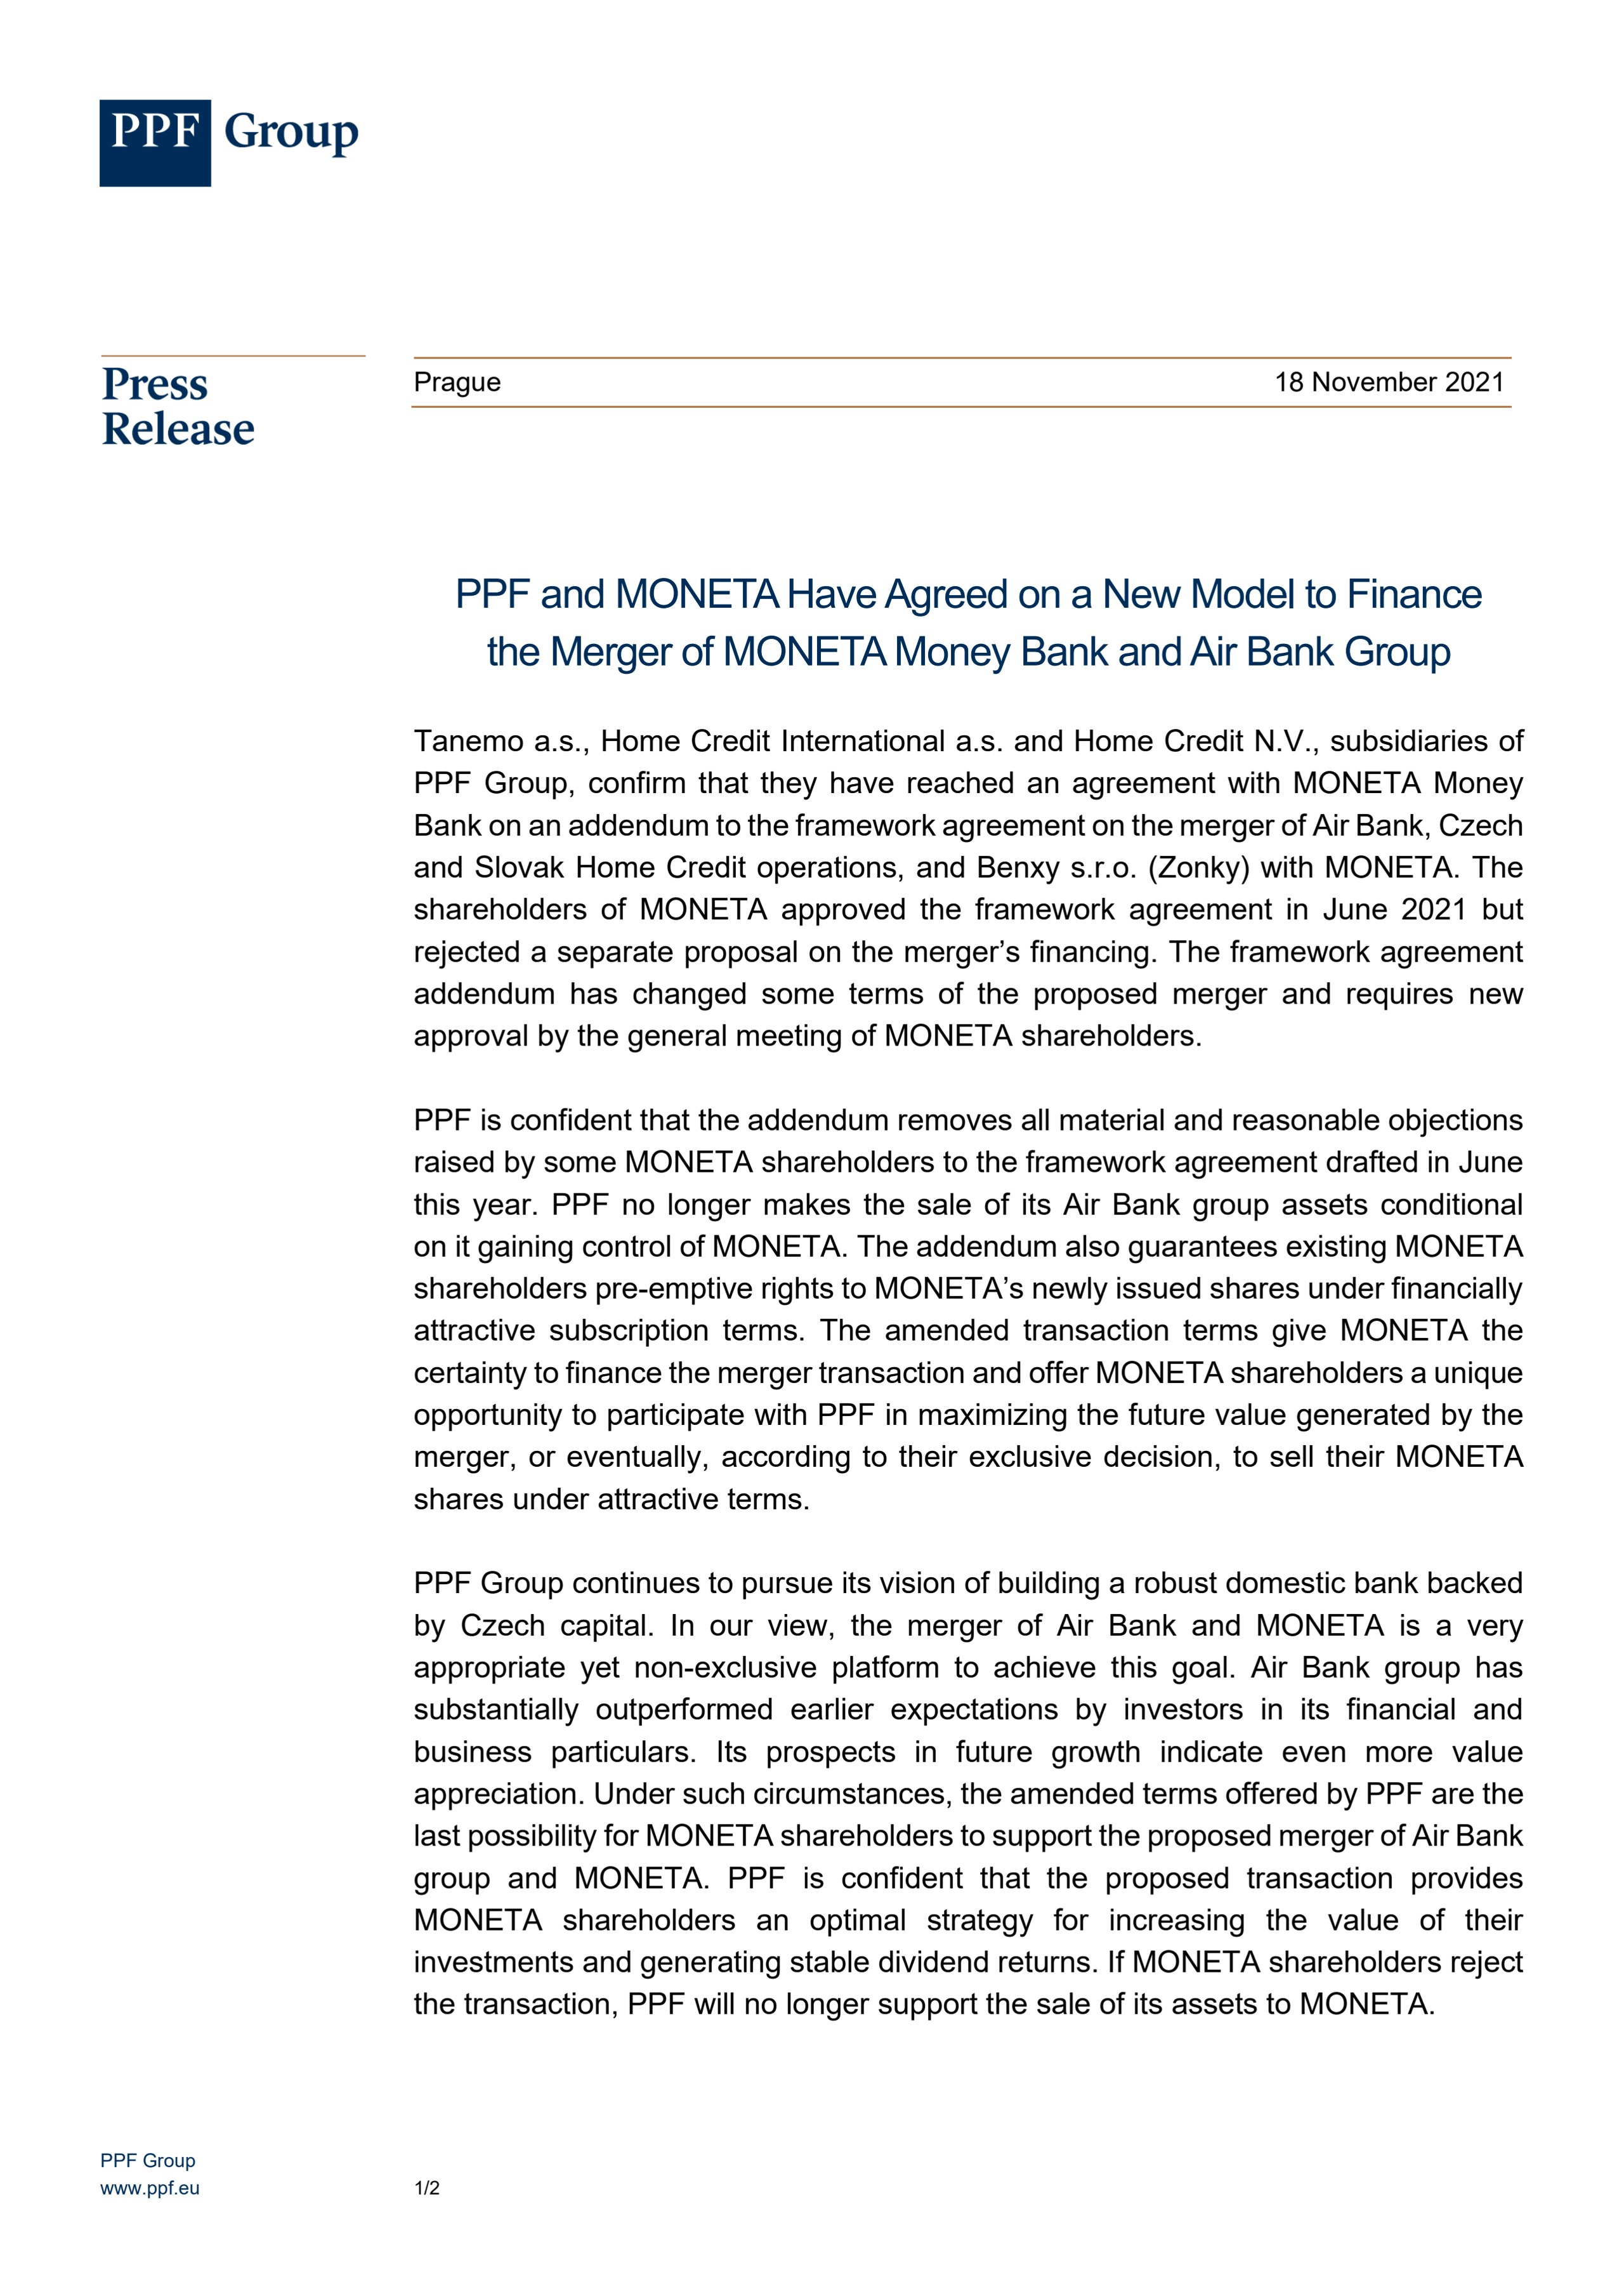 PPF and MONETA Have Agreed on a New Model to Finance the Merger of MONETA Money Bank and Air Bank Group